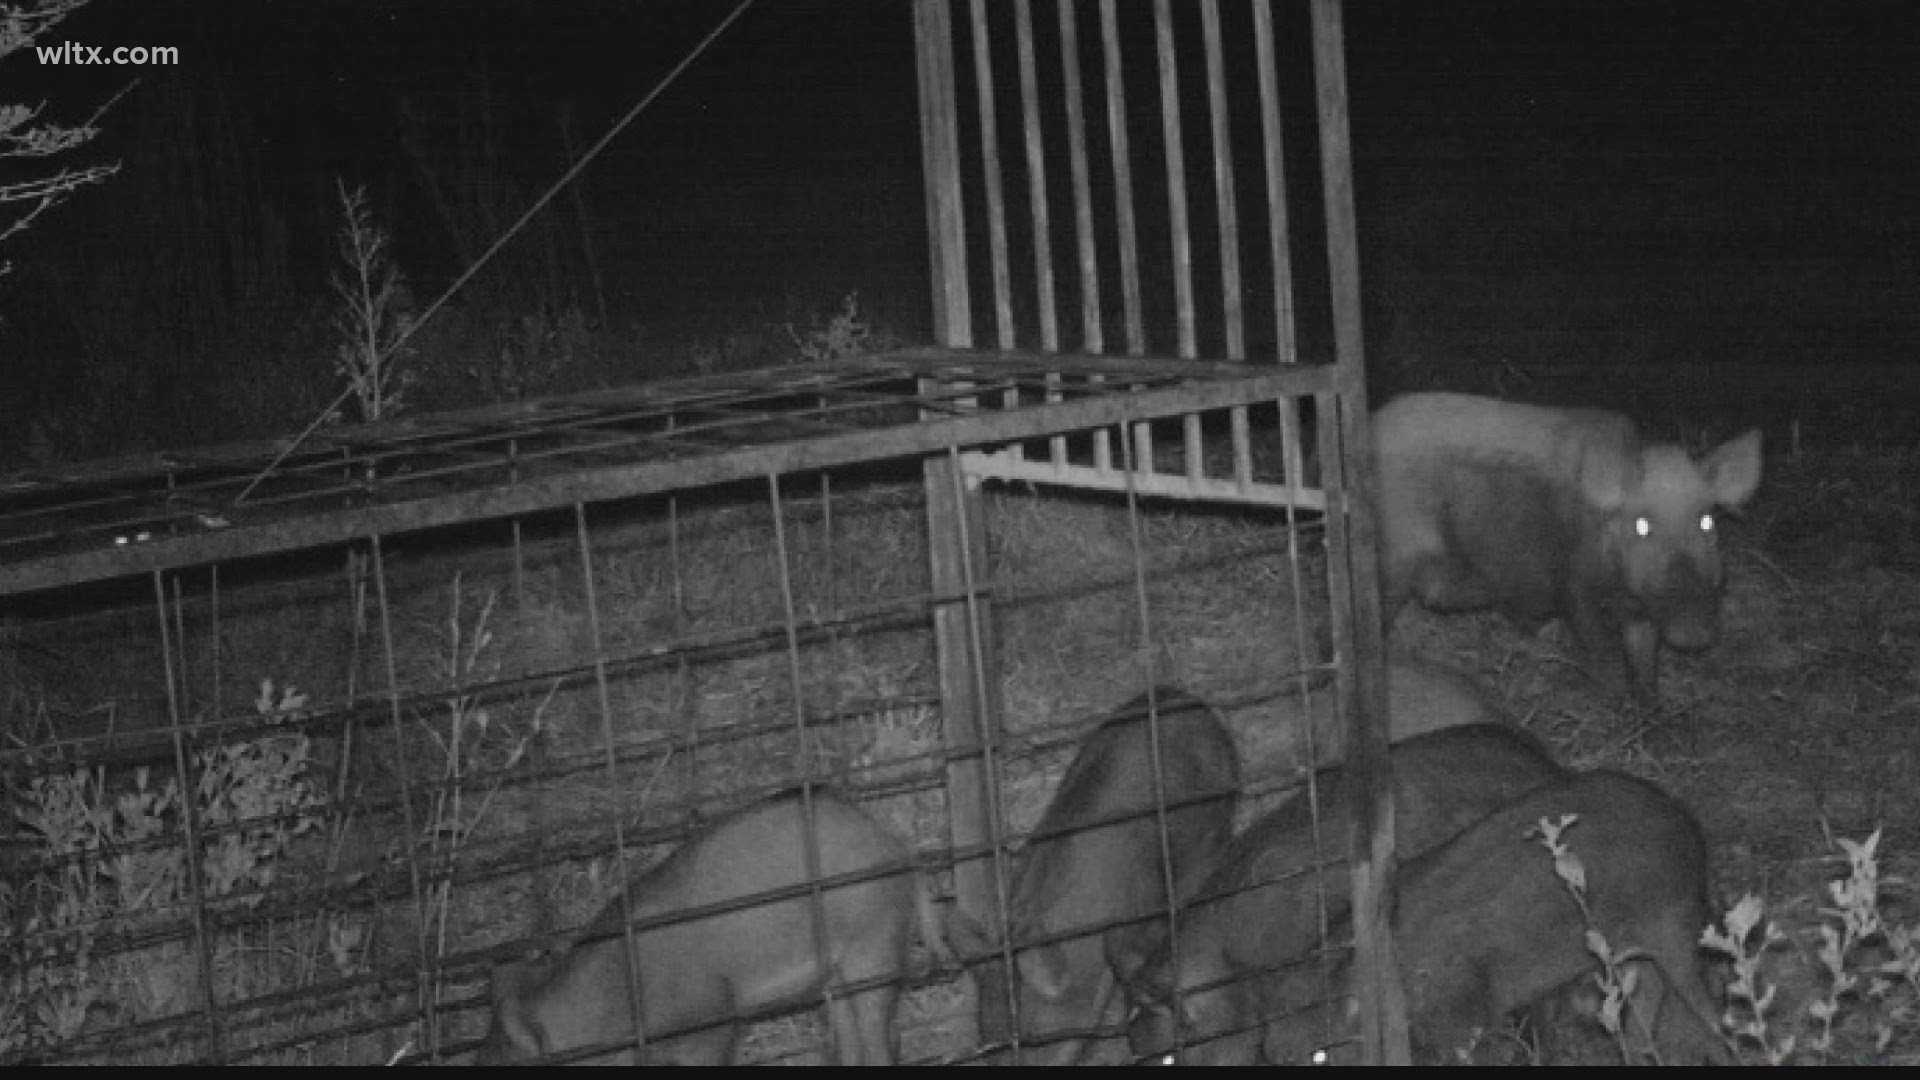 With increasing feral hogs in South Carolina, many farmers are having trouble stopping them from eating their crops.